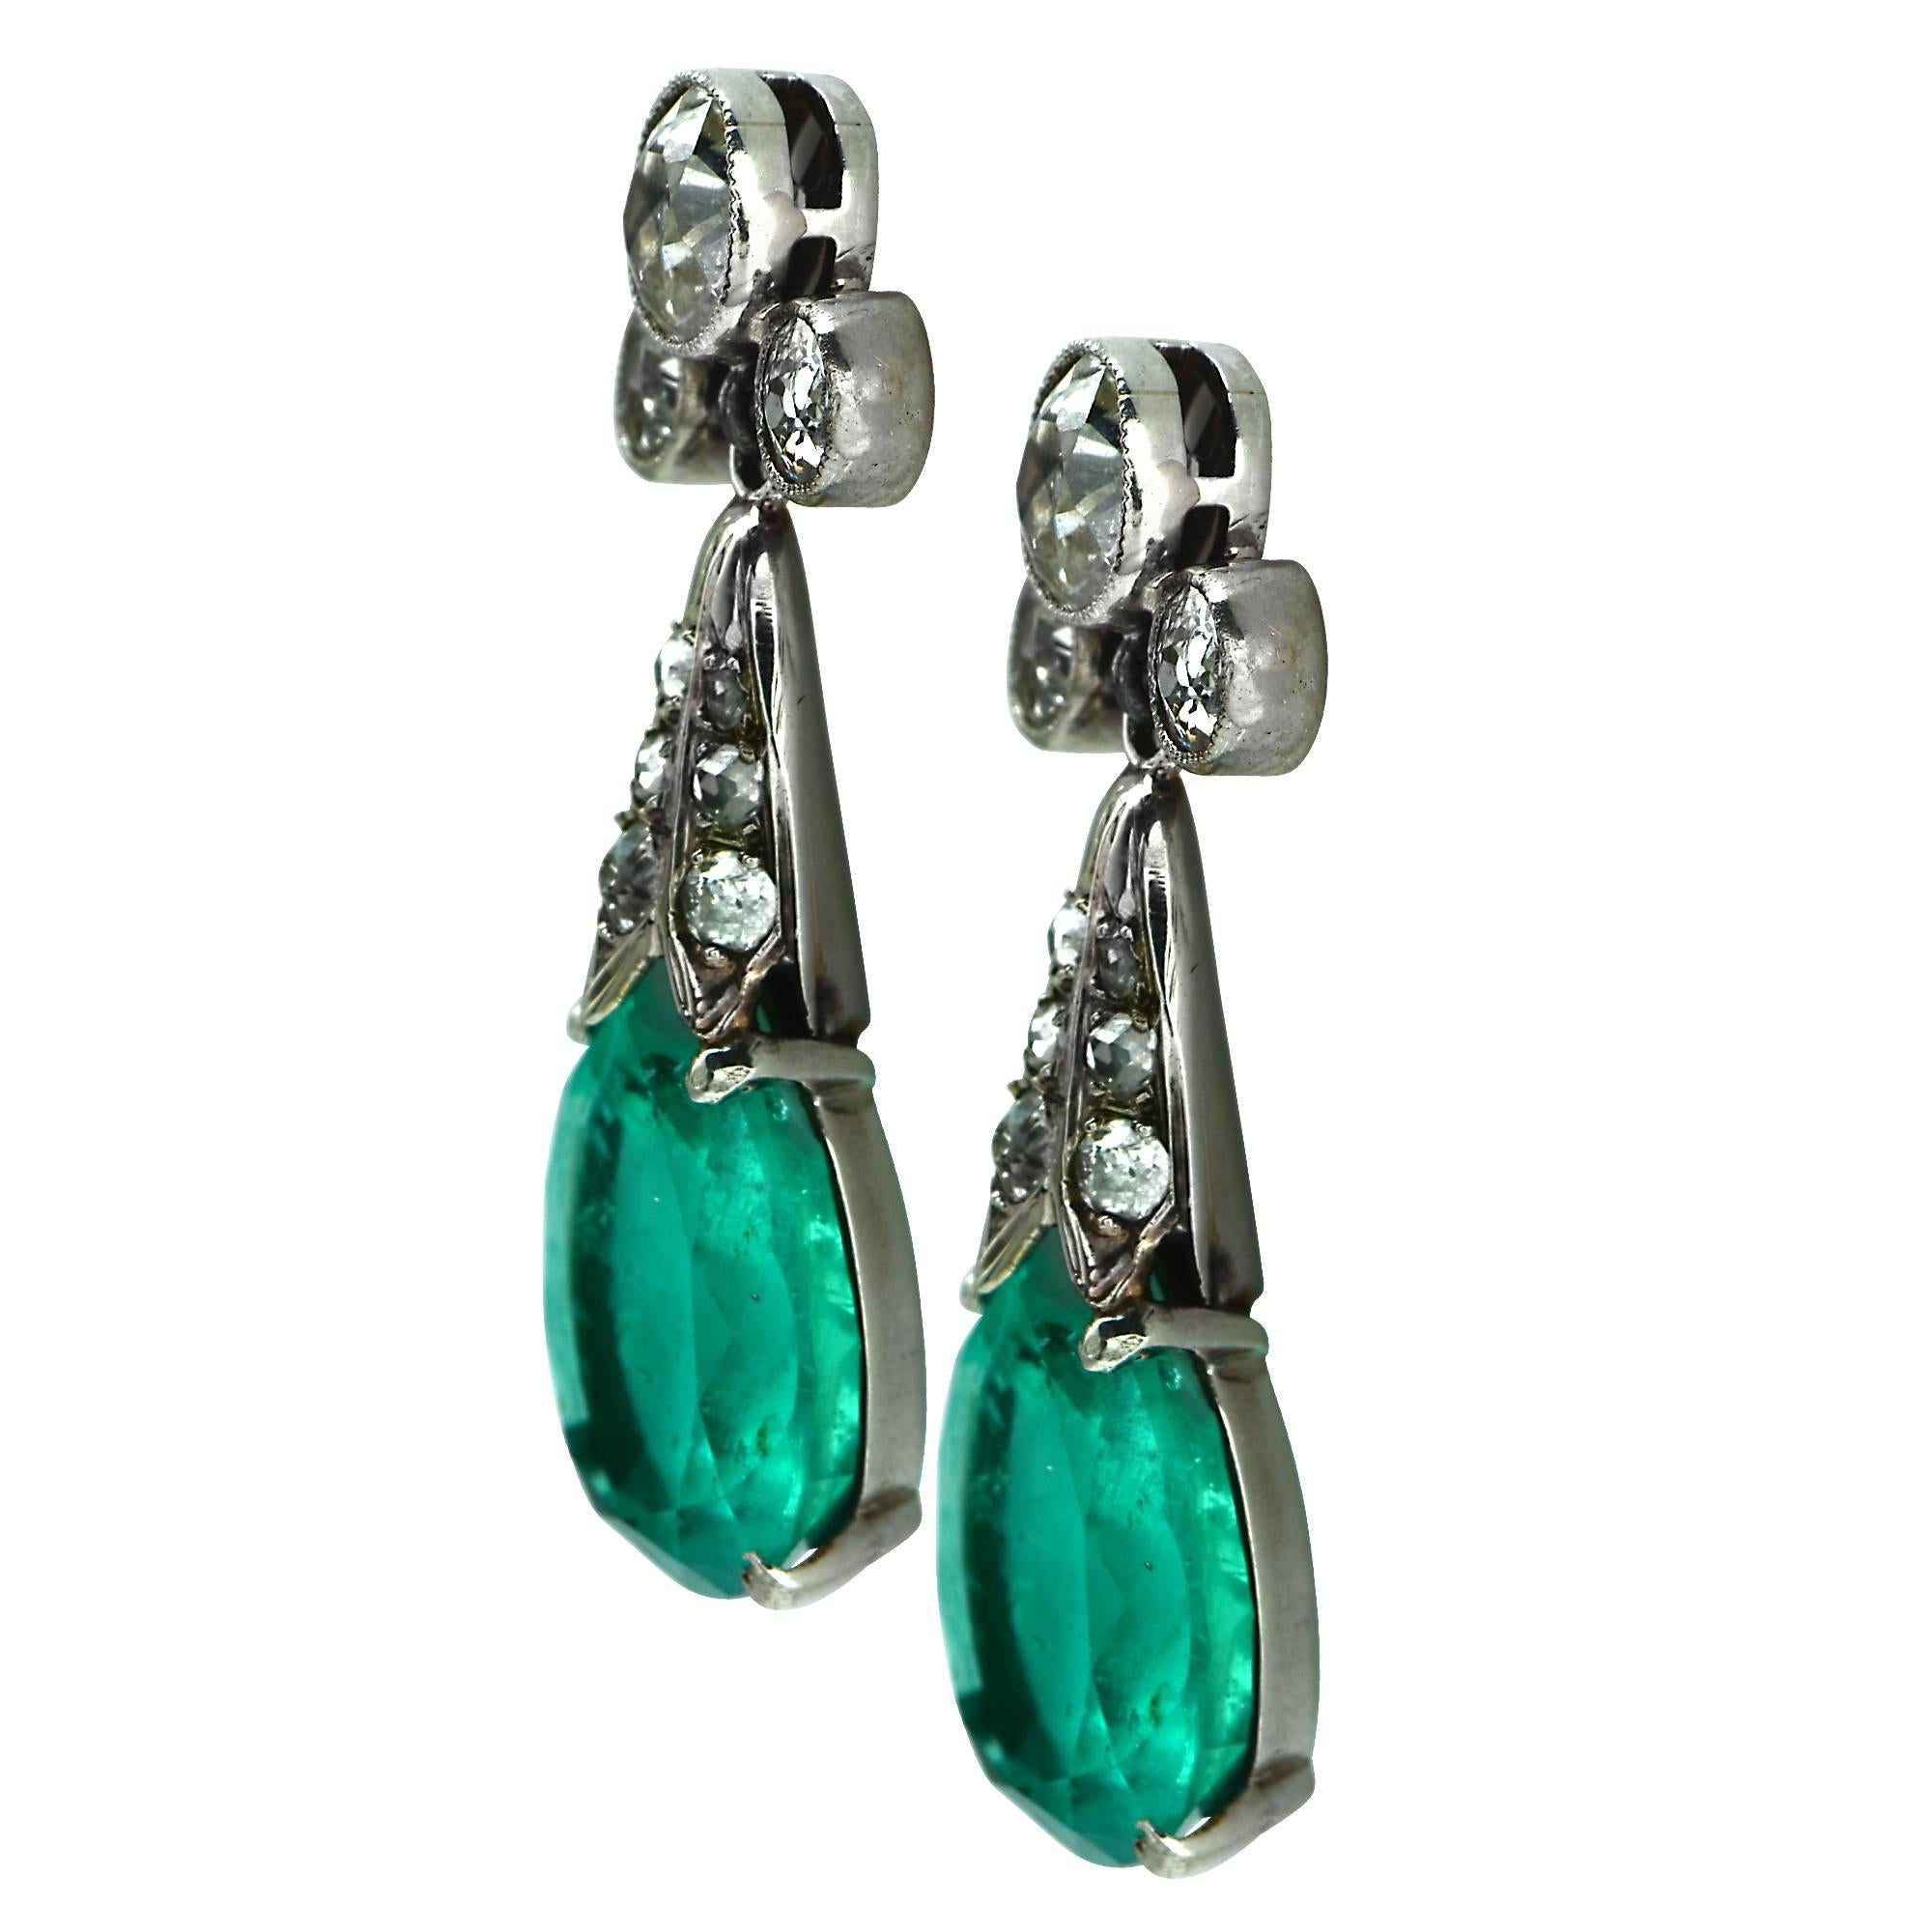 Platinum modern Edwardian inspired dangle earrings featuring 2 pear shape Colombian emeralds weighing 9.84cts total. Accented by 24 European cut diamonds weighing approximately 3.20cts total, G-H color VS-SI clarity. The earrings measure 1.2 inches